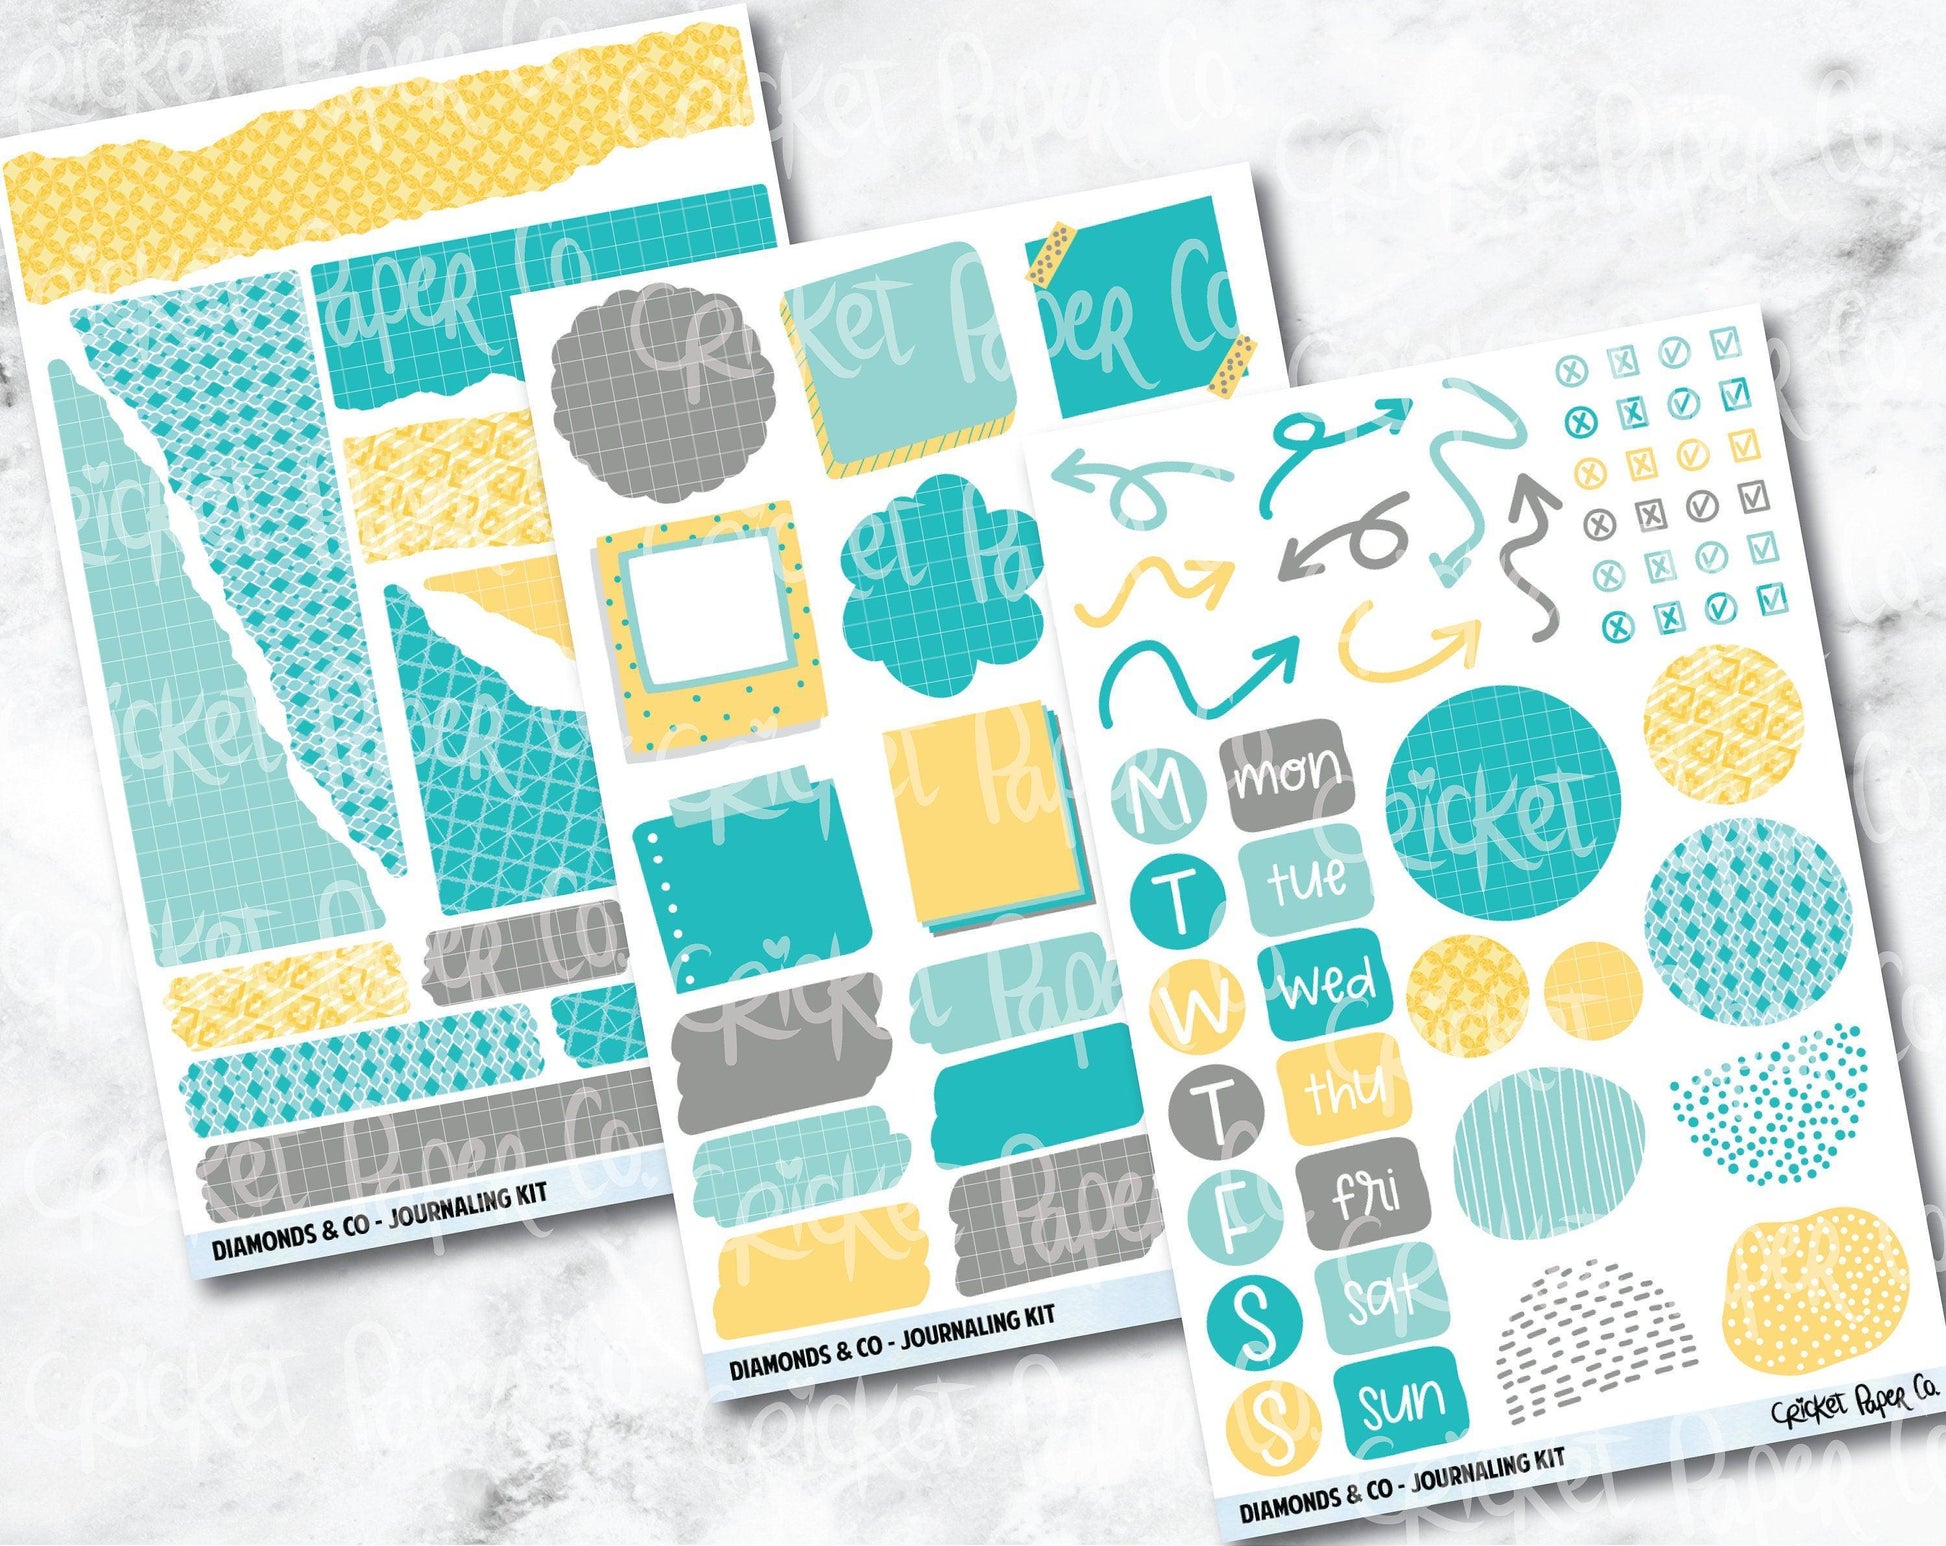 JOURNALING KIT Stickers for Planners, Journals and Notebooks - Diamonds & Co.-Cricket Paper Co.